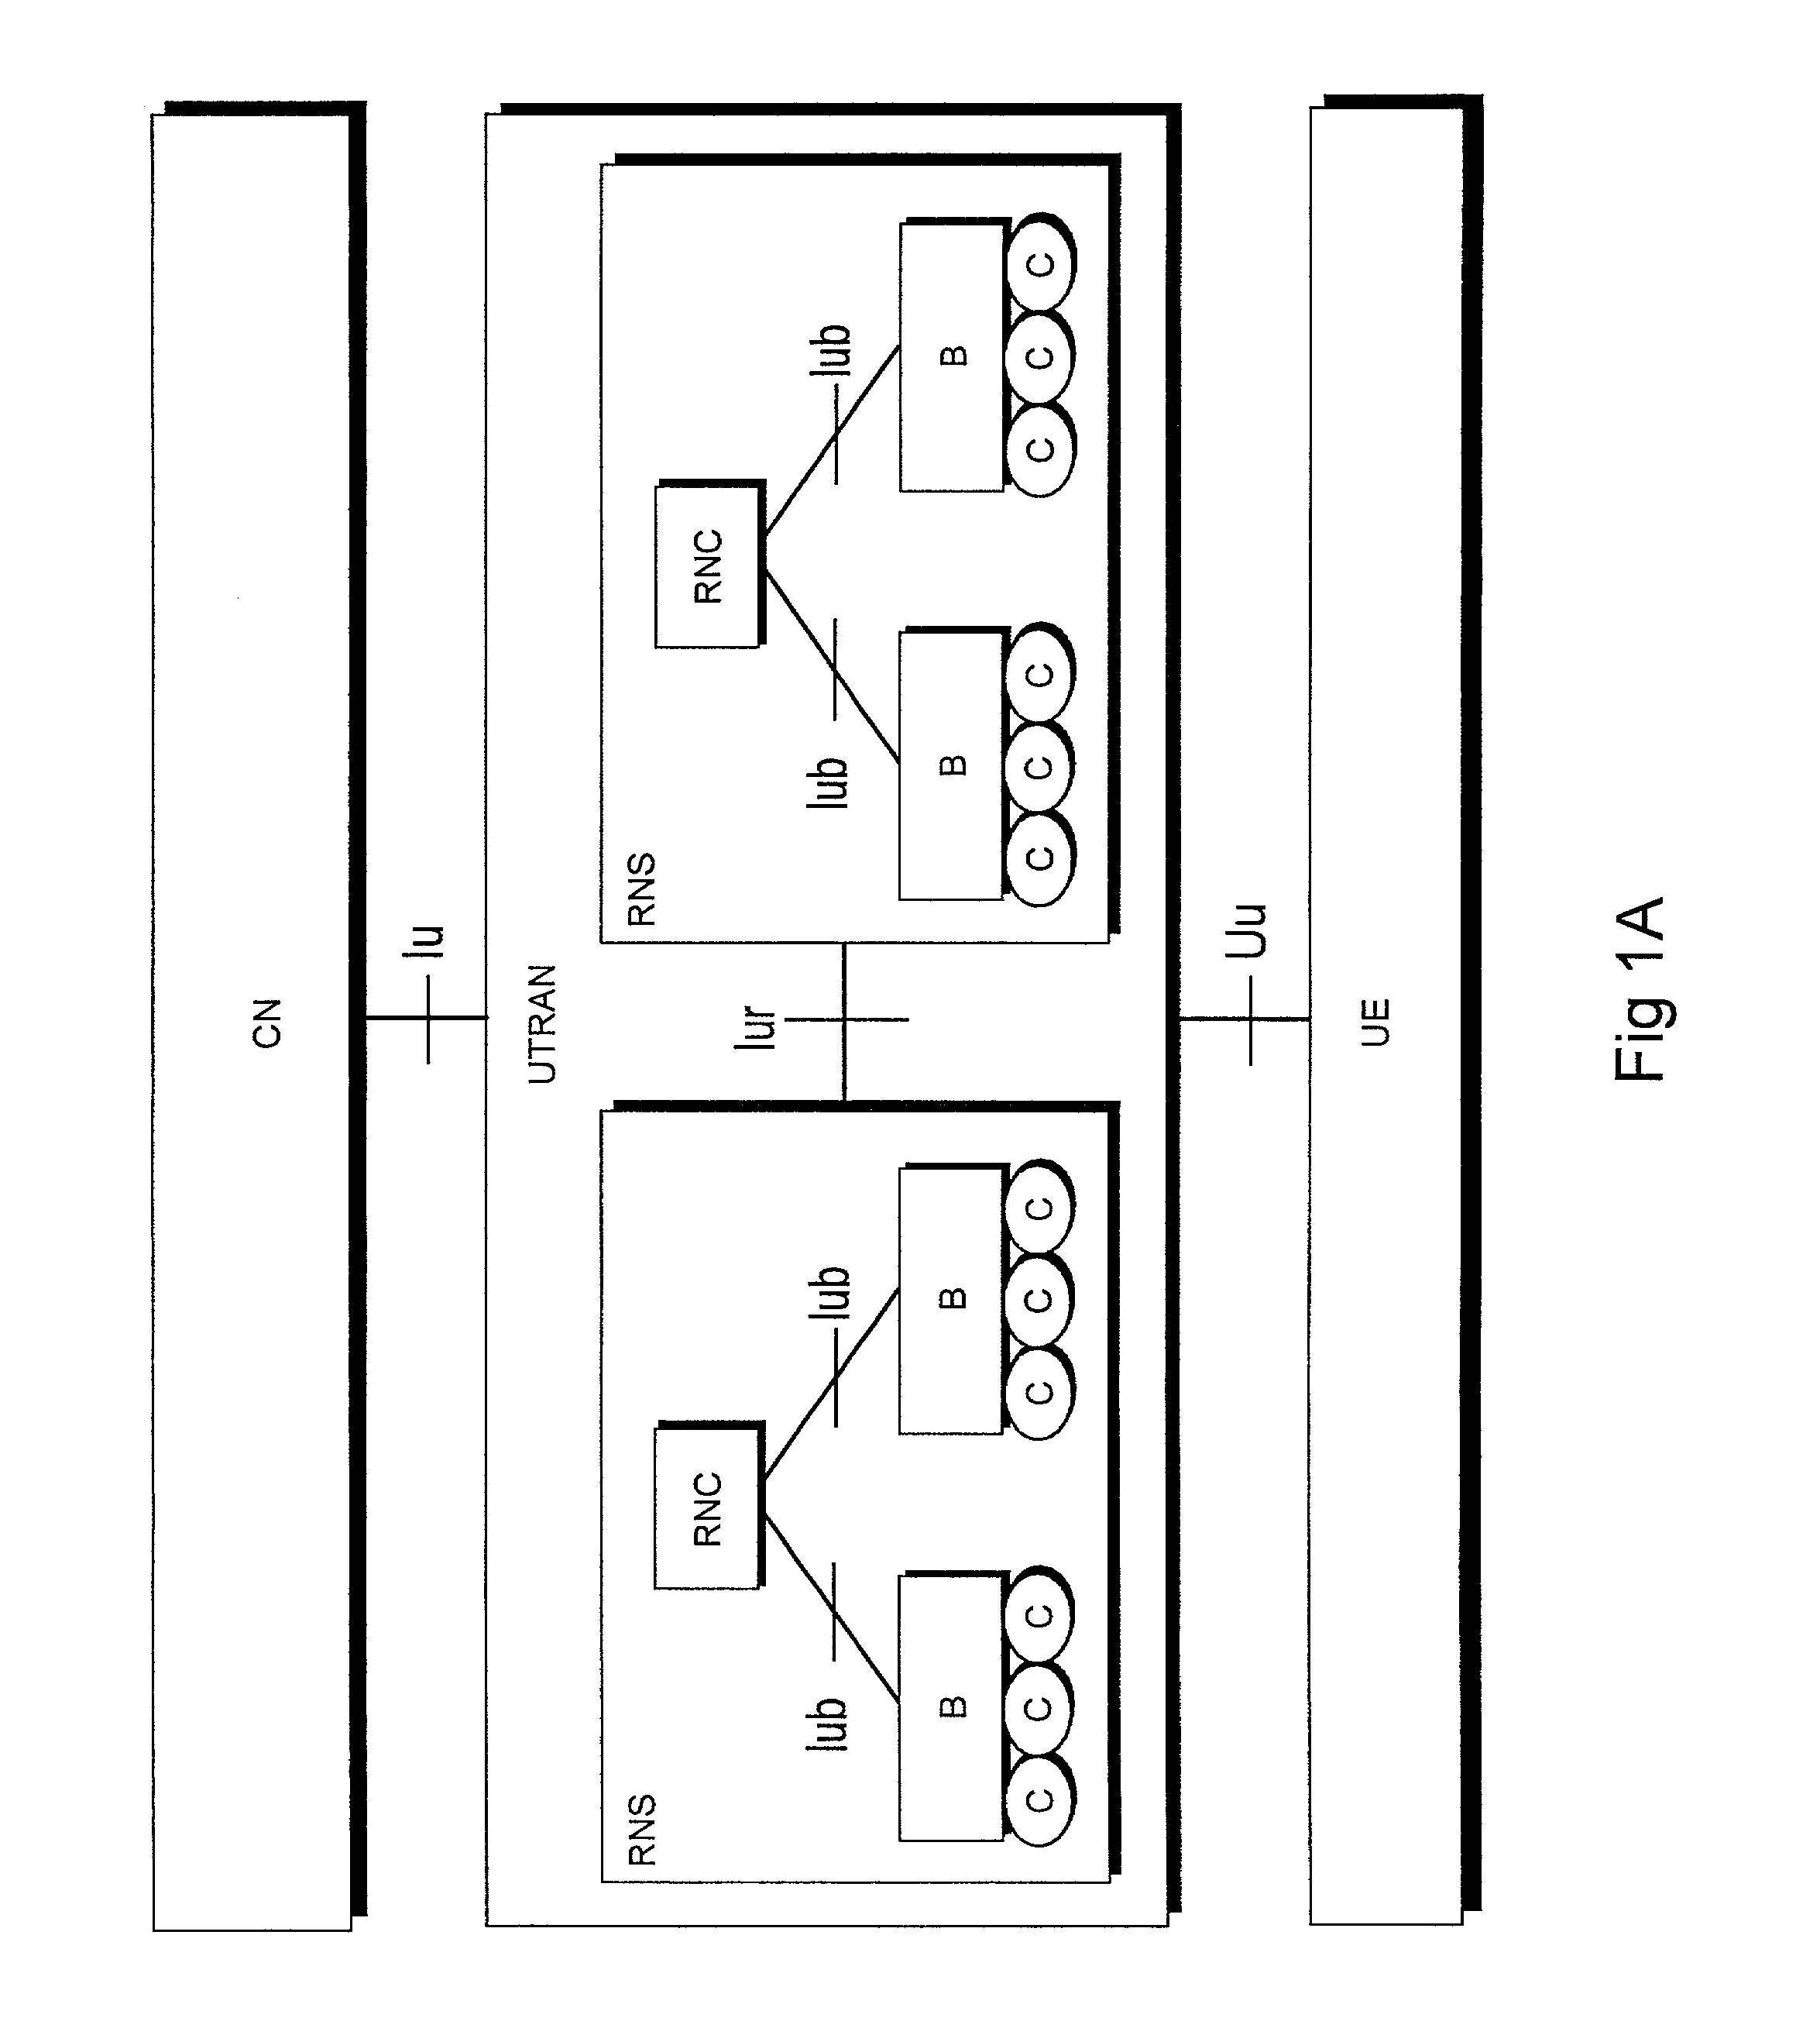 Method of transmitting data from a transmitter to a receiver, and a radio system